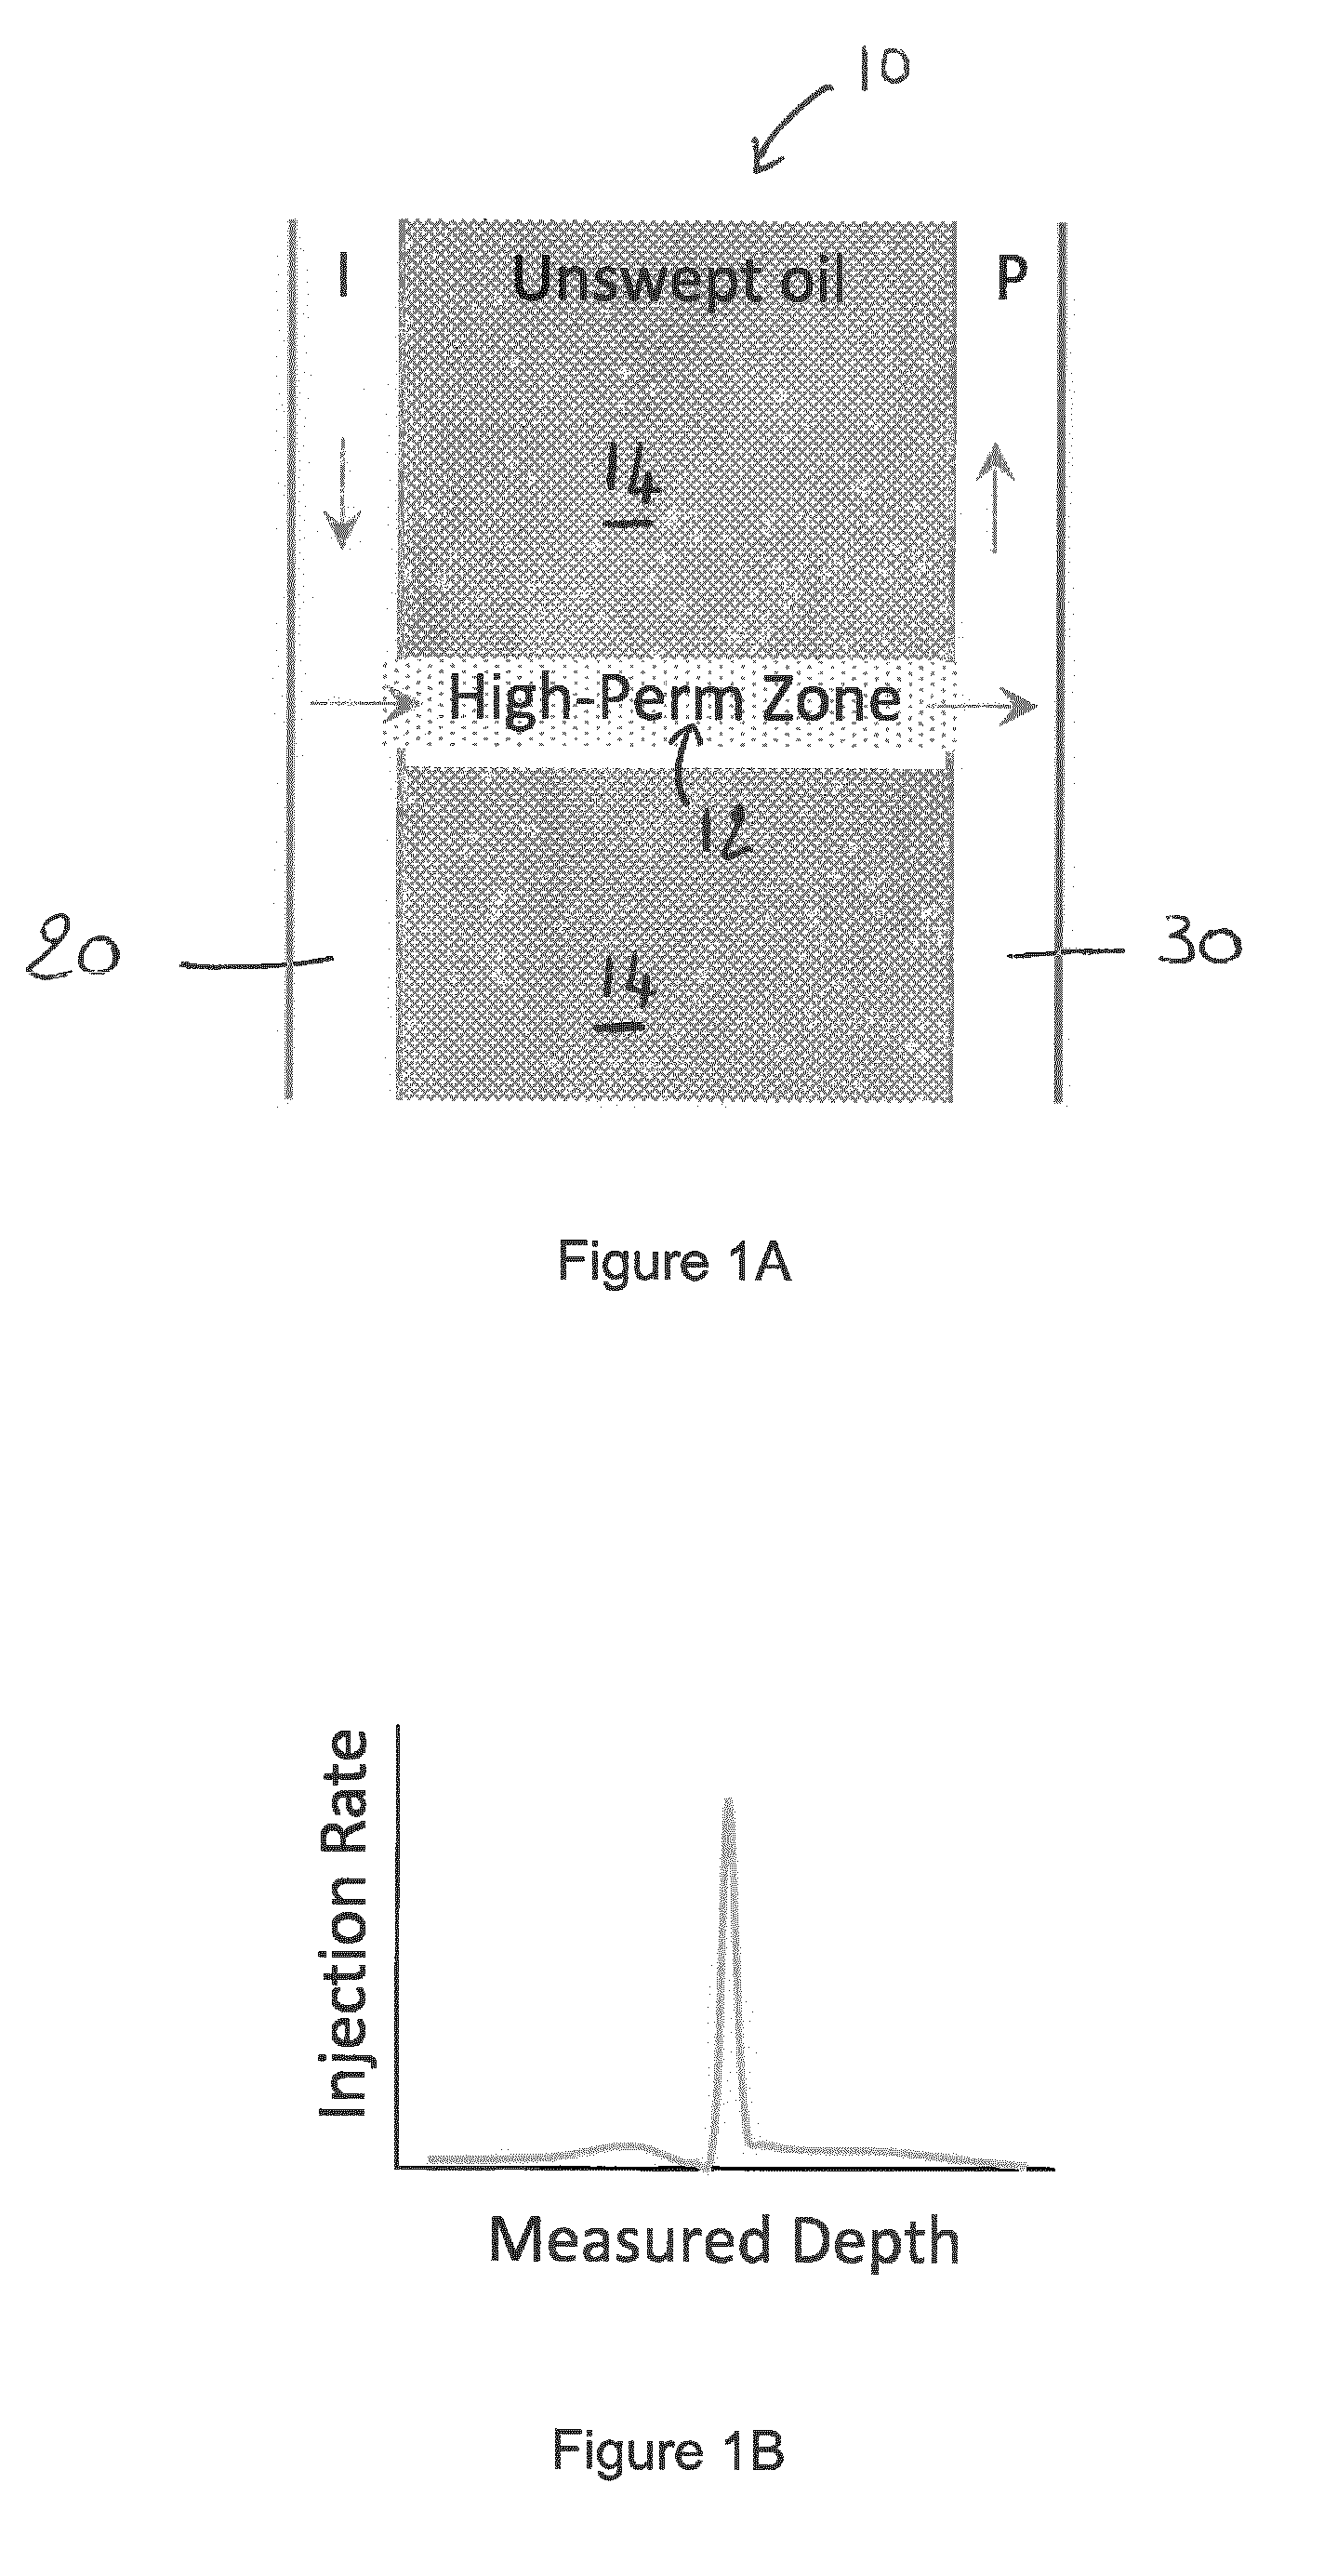 Controlled alternating flow direction for enhanced conformance